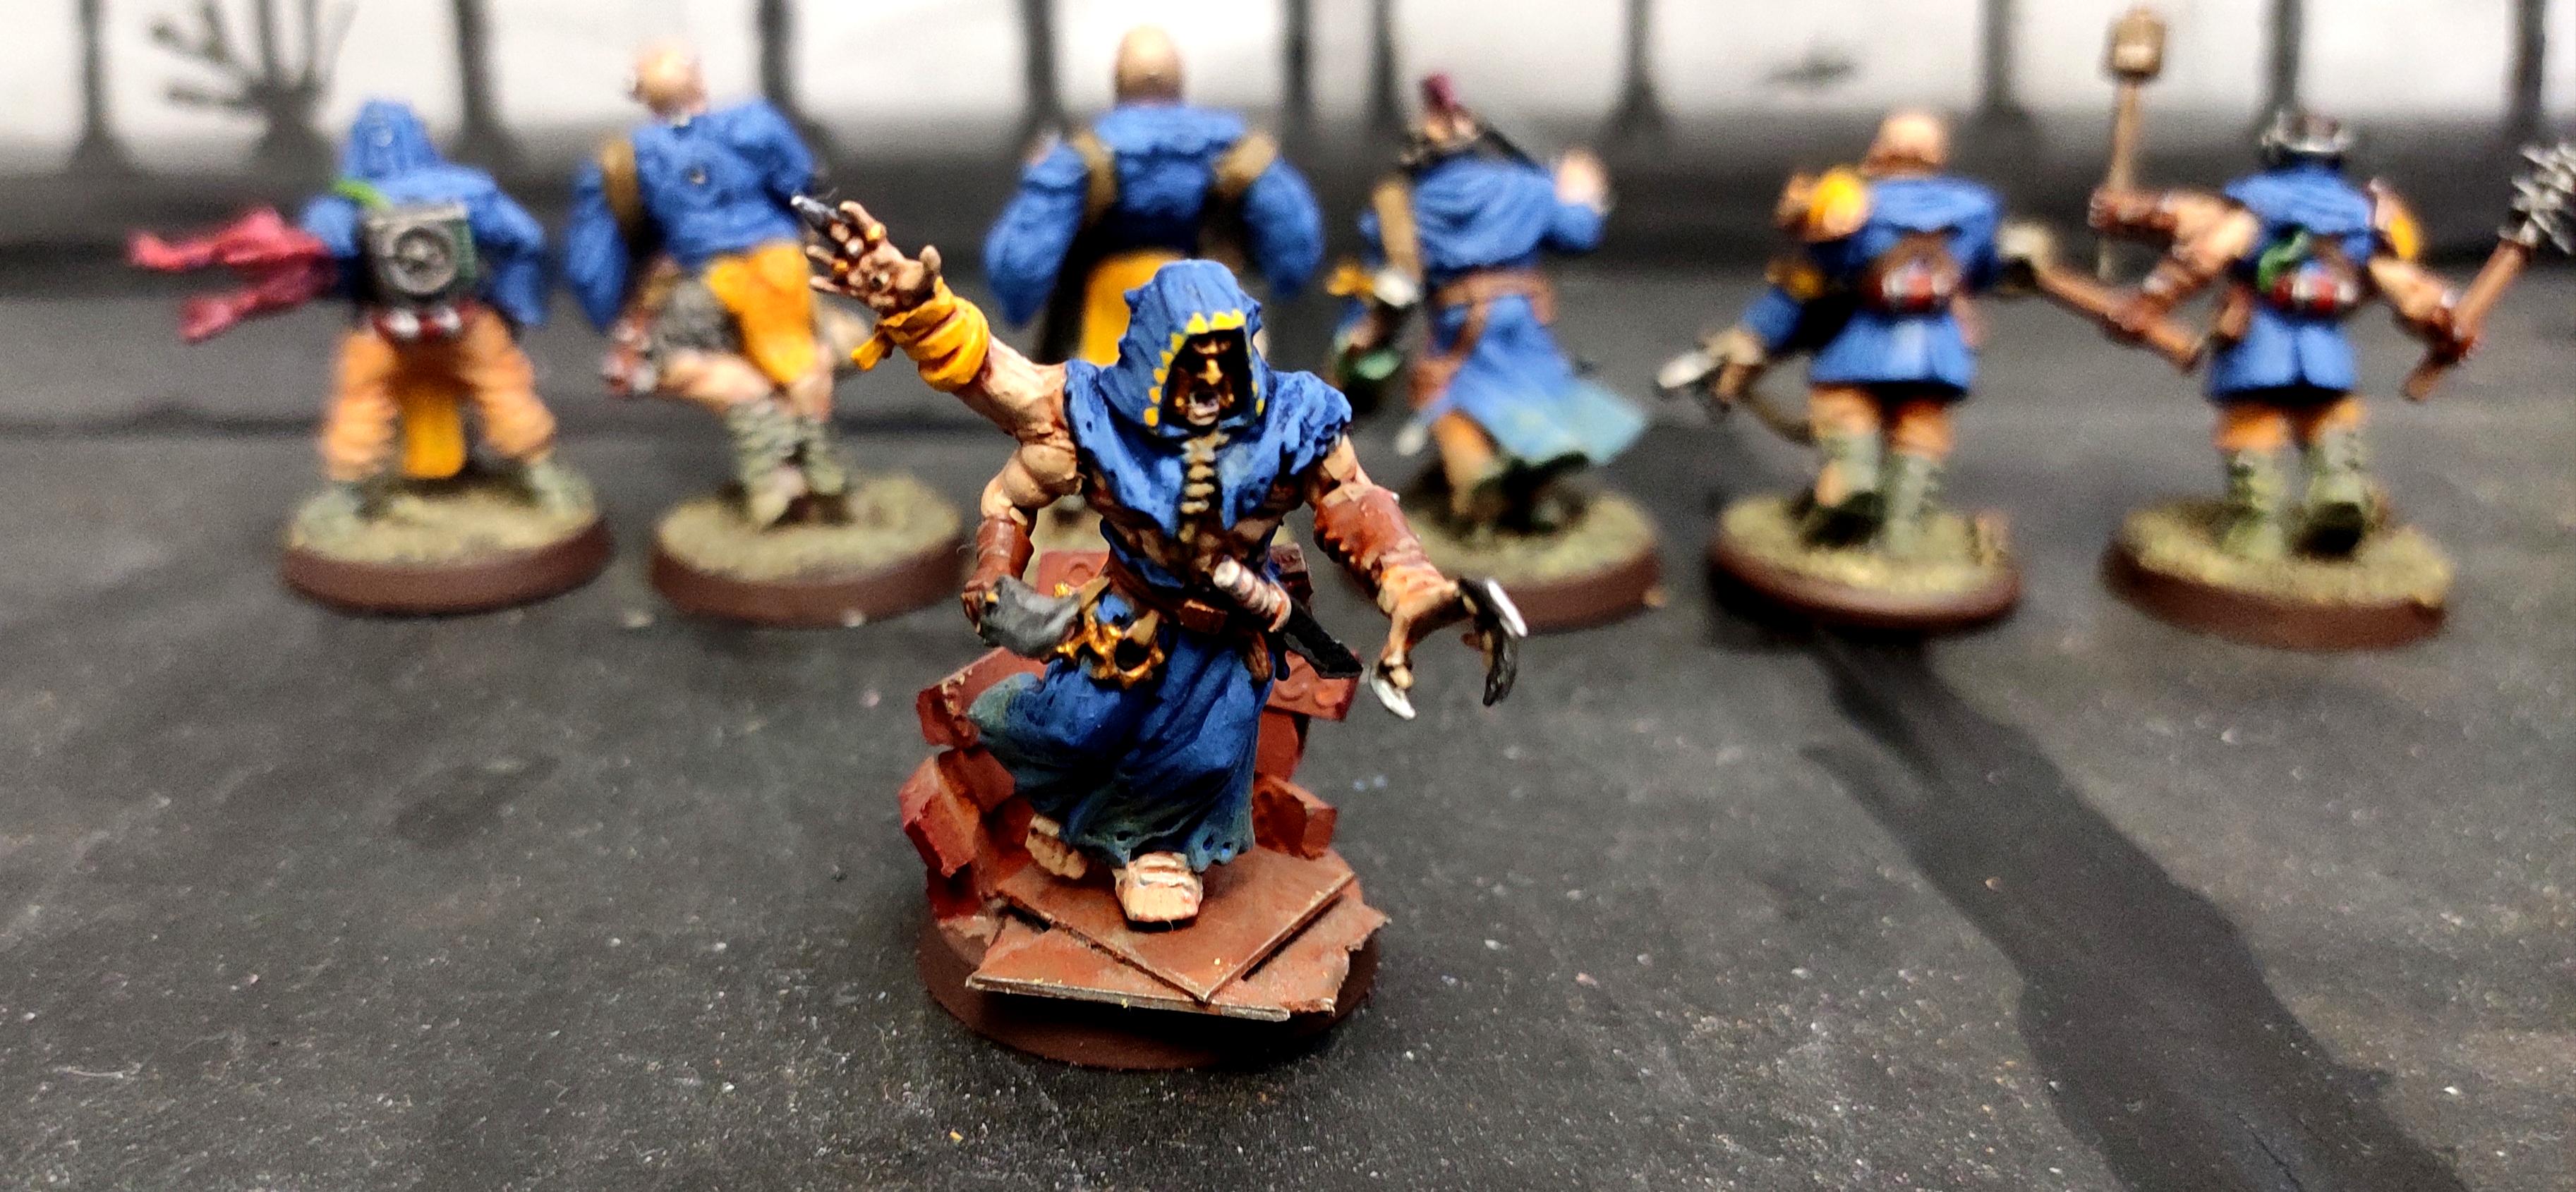 Anarkus, Chaos, Chaos Cultists, Commander, Conversion, Cult, Cult Leader, Cultist Champion, Cultists, Dark Vengeance, Heresy, Heretics, Infantry, Kitbash, Lost And The Damned, Mutant, Regiment, Renegade, Sorcerer, Tzeentch, Warhammer 40,000